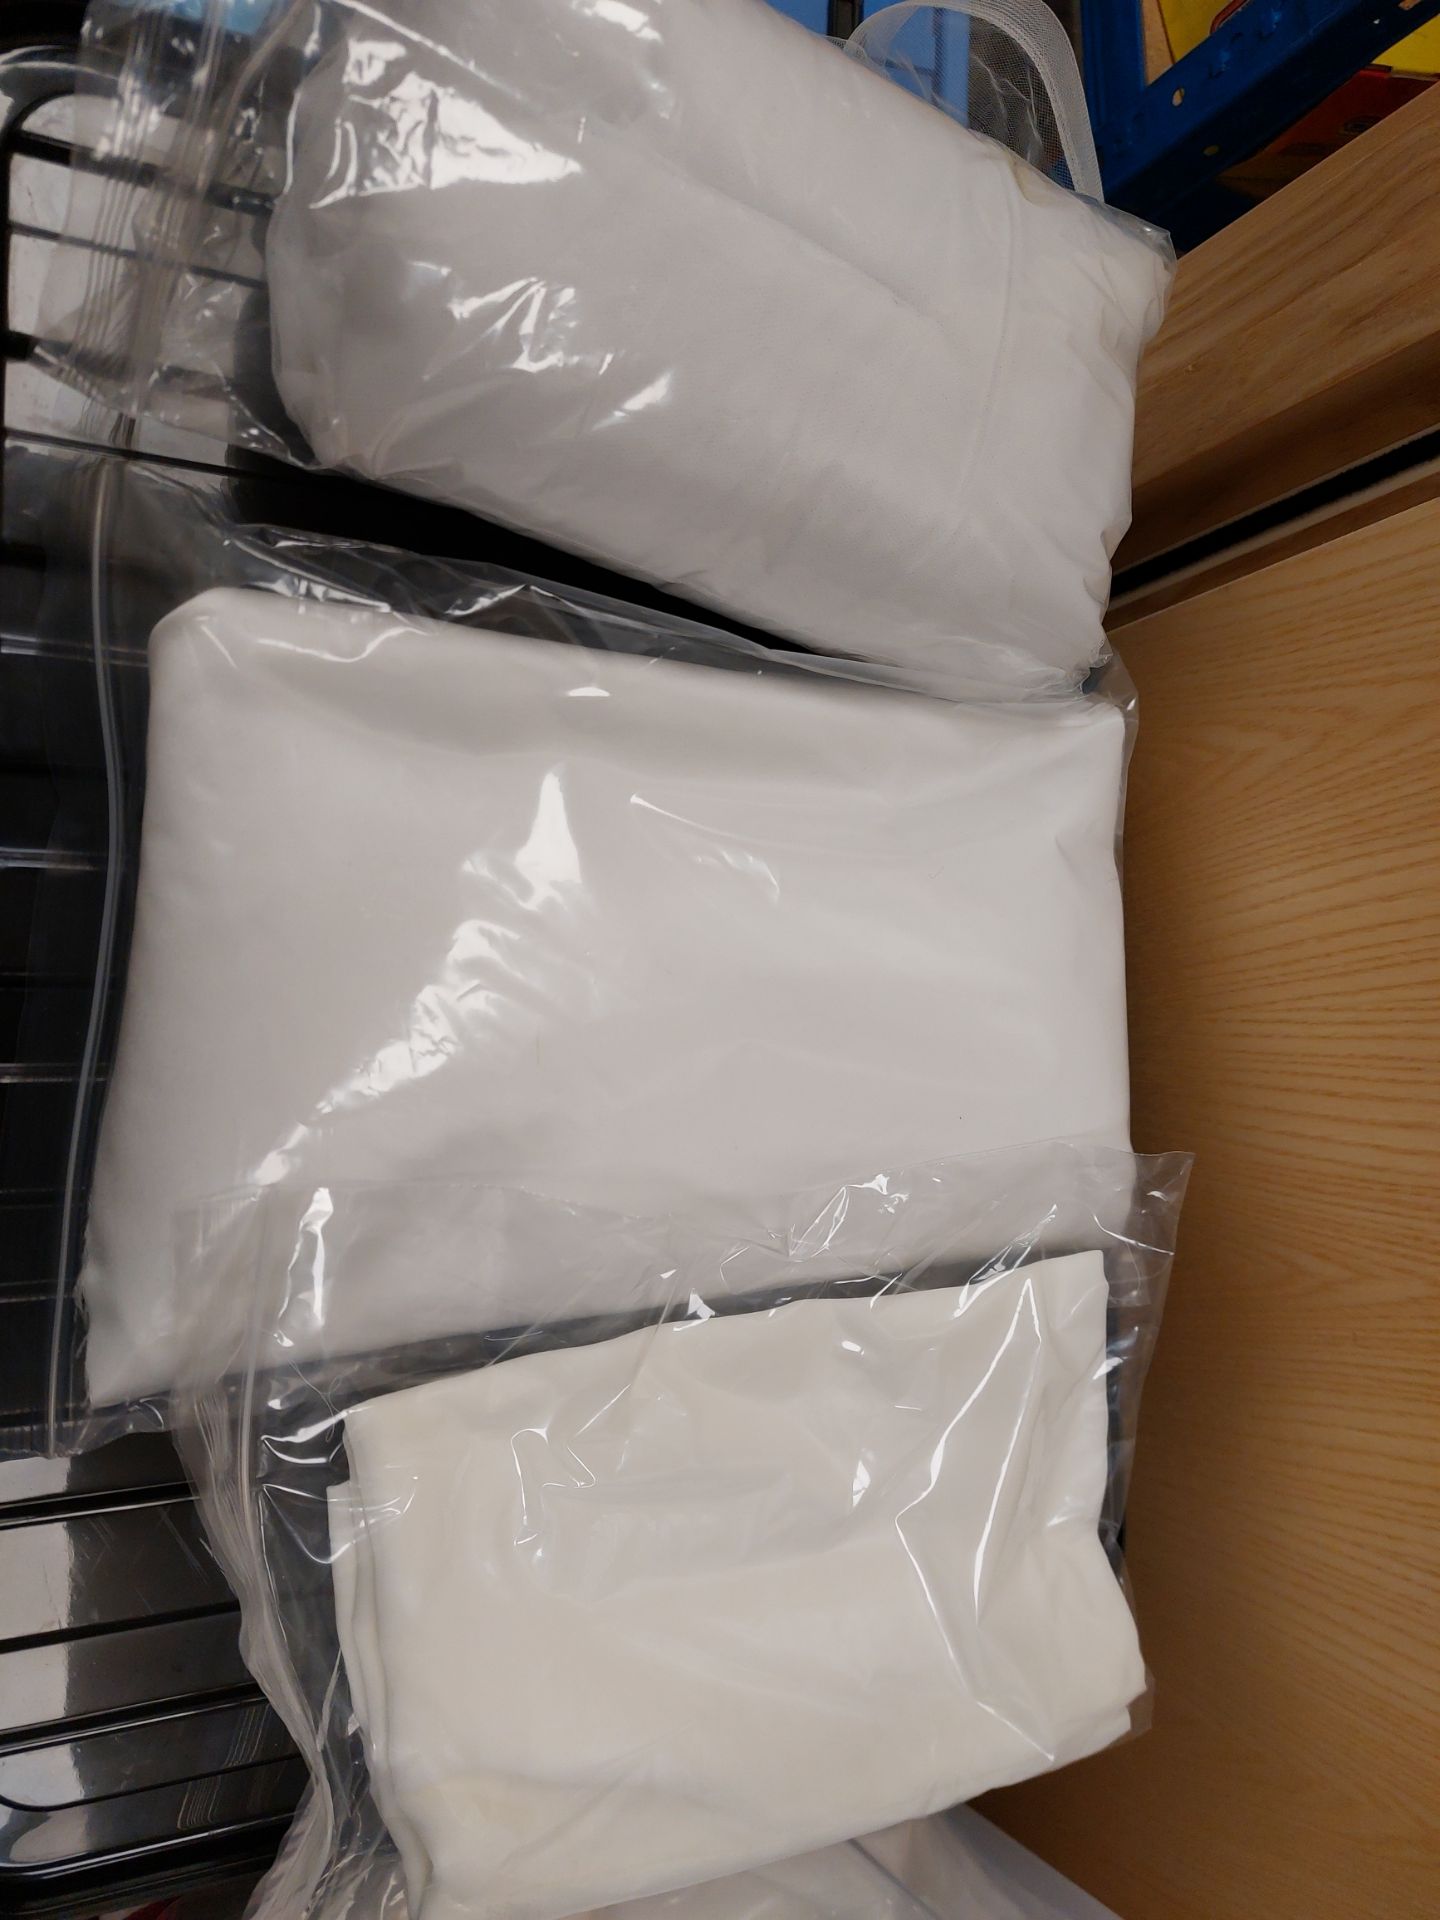 Quantity of Ivory Or White Fabric Bundles - Image 3 of 8